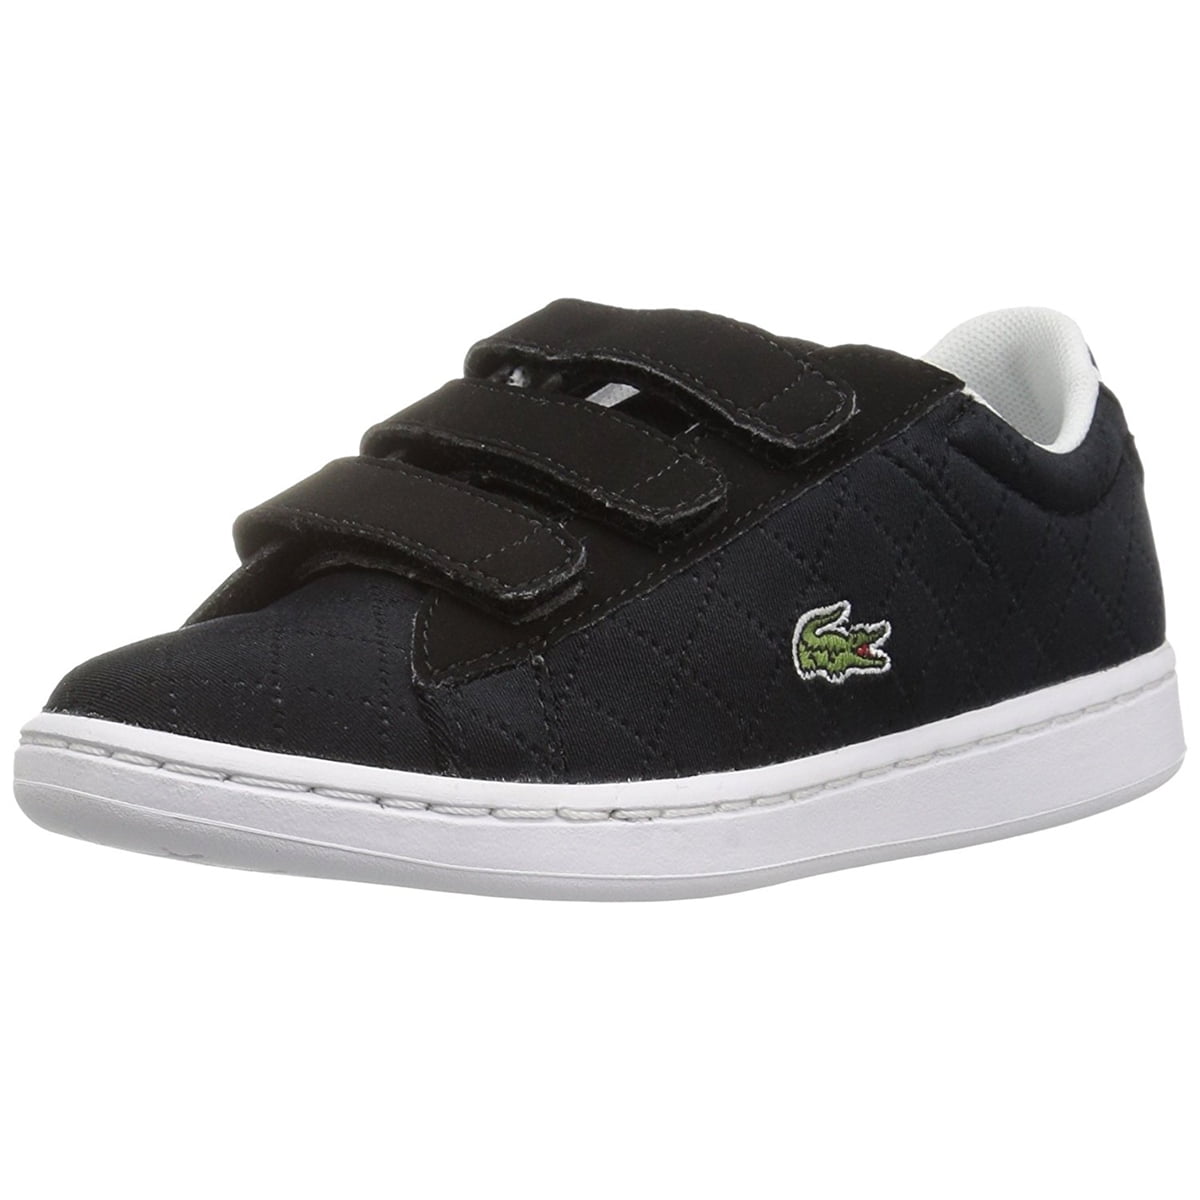 Boy's Lacoste Infant Carnaby Evo Hook and Loop Strap Trainers in Black 